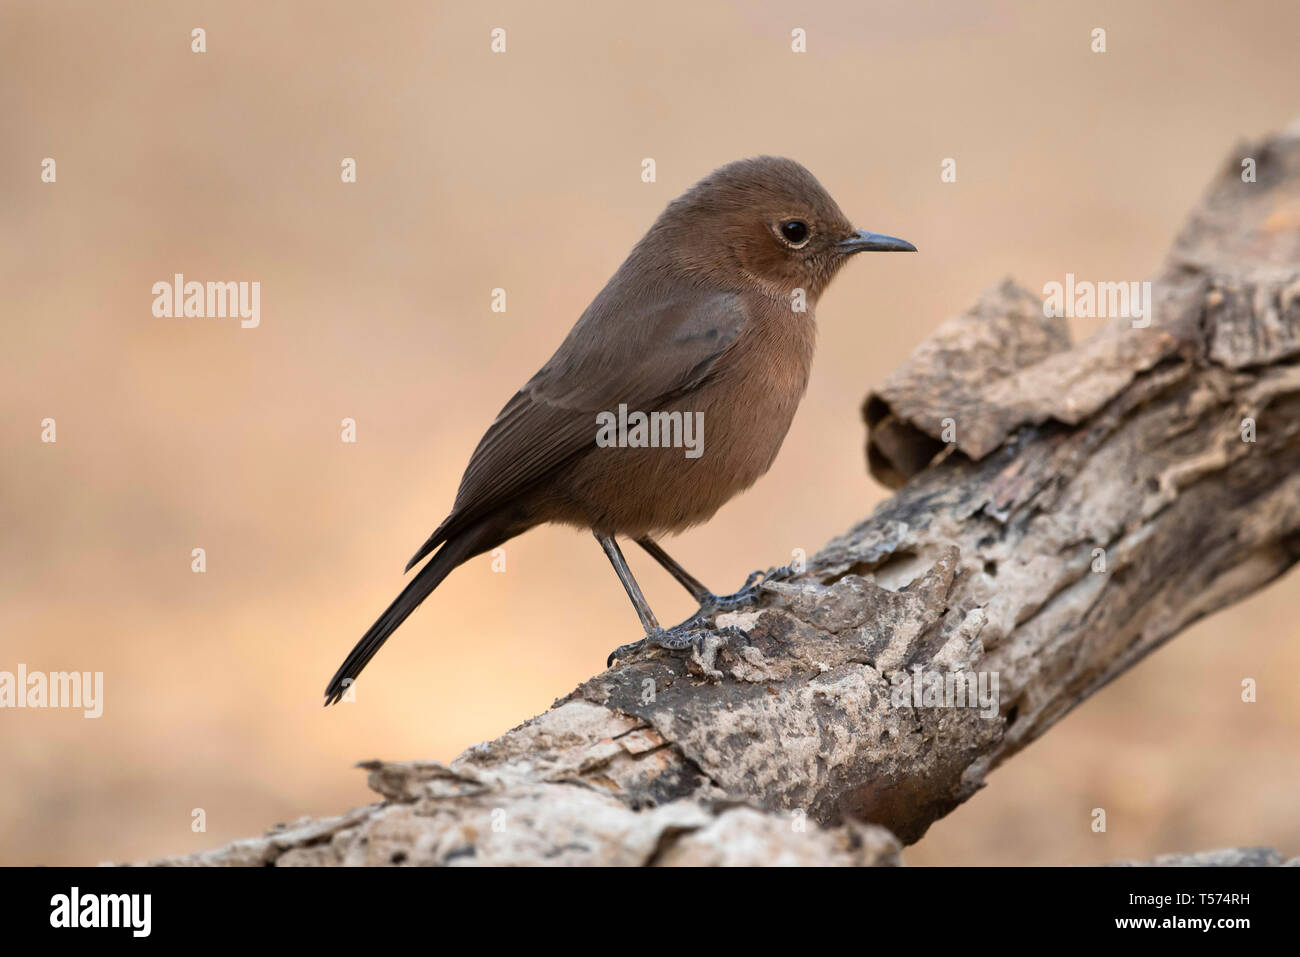 Roccia marrone o in chat chat indiano, Oenanthe fusca, Tal Chhapar Santuario, Rajasthan, India. Foto Stock